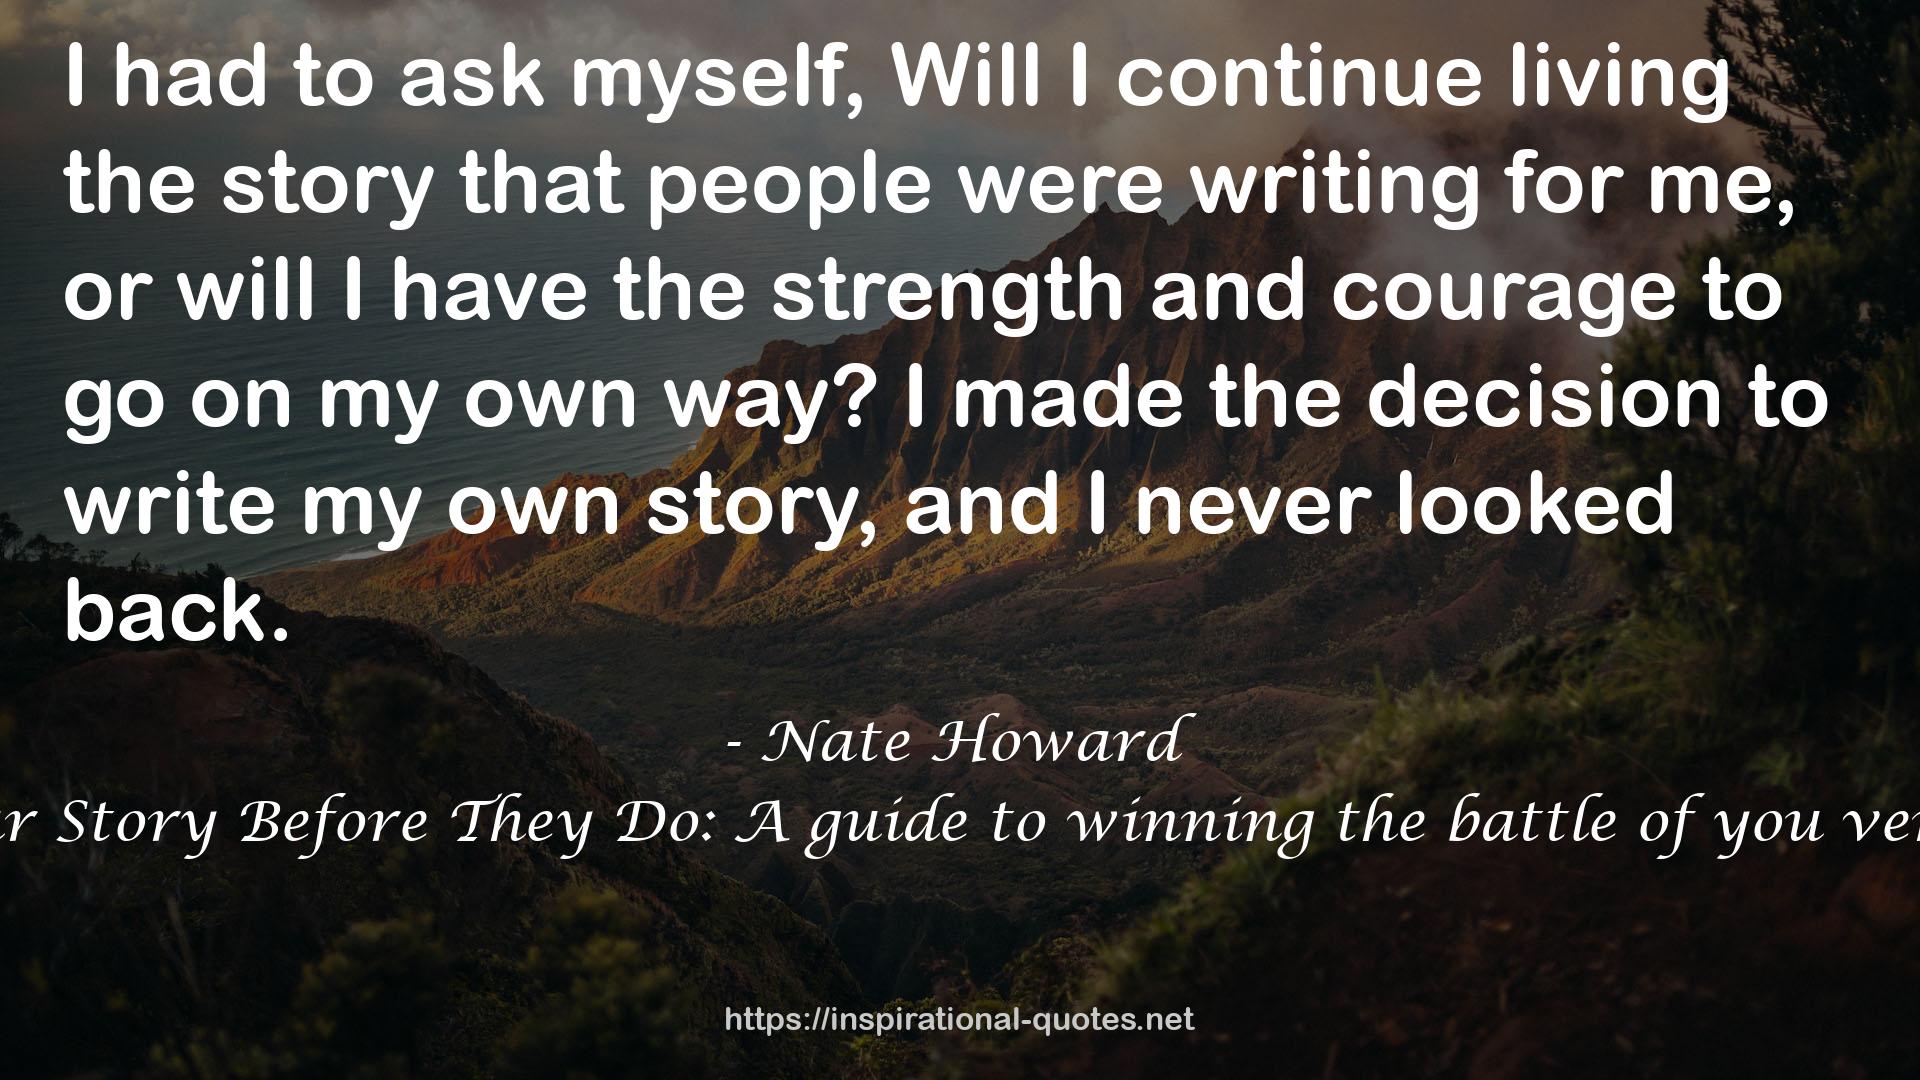 Nate Howard QUOTES